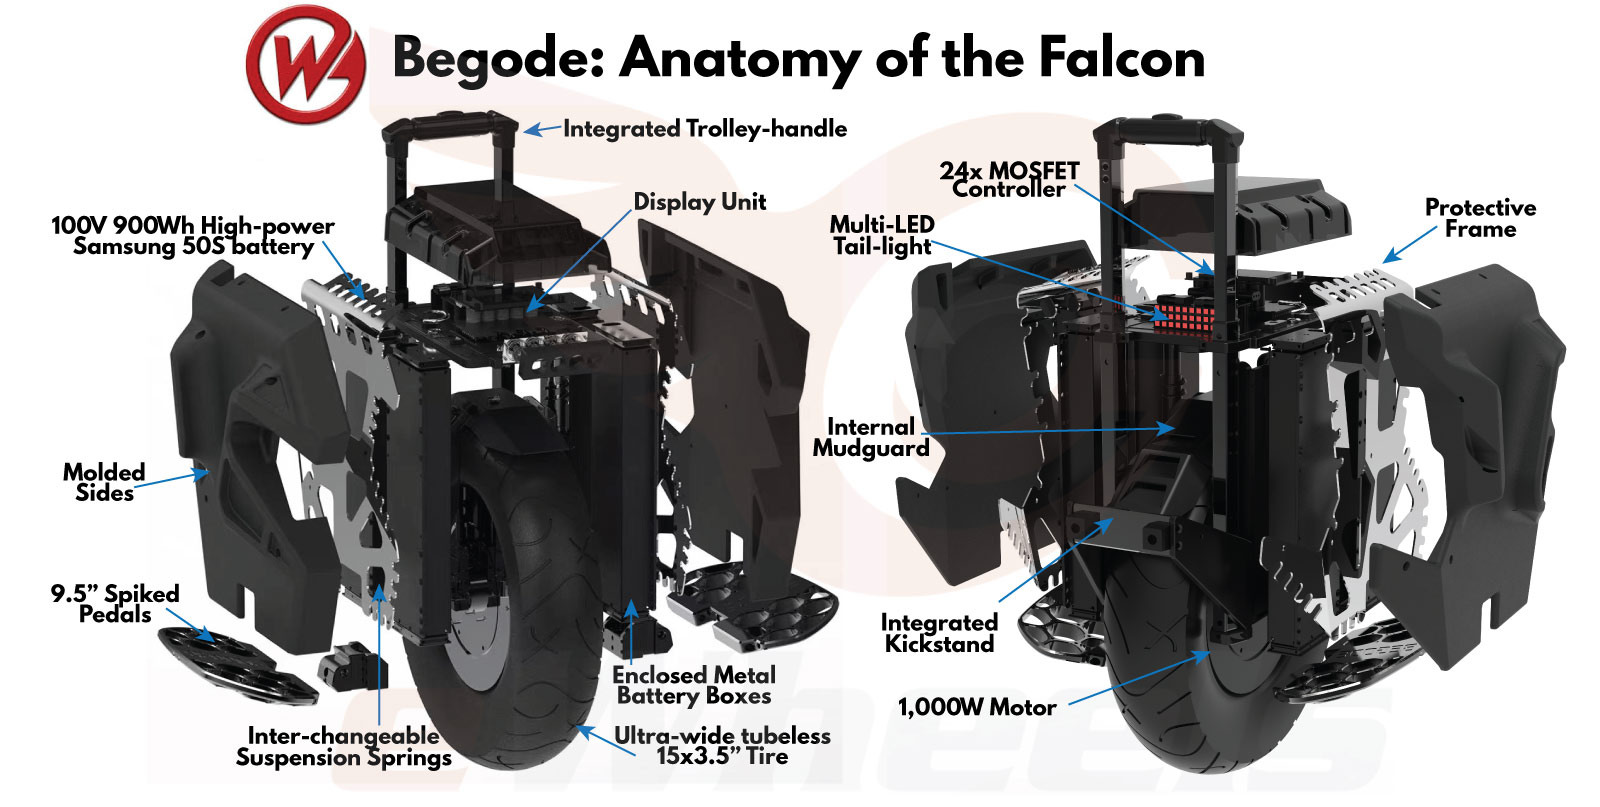 Begode Falcon Anatomy Blow-up of Components